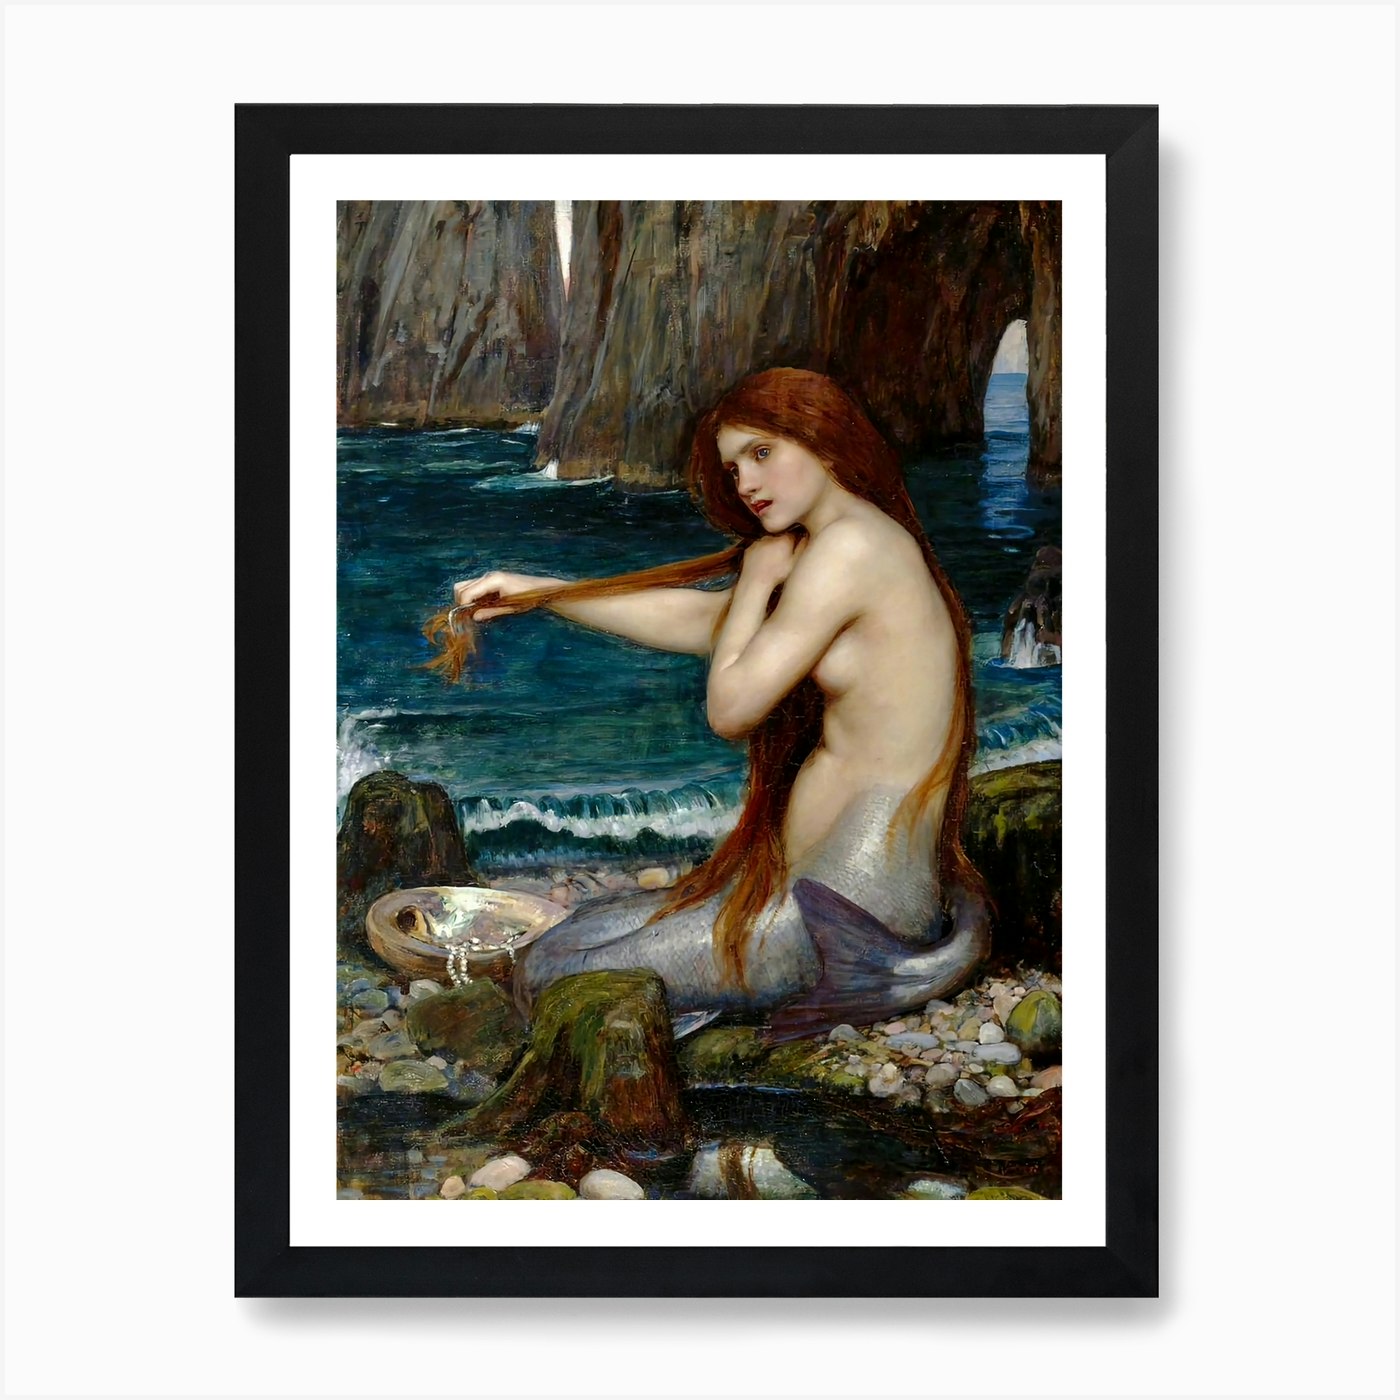 A Mermaid by John William Waterhouse - Remastered Oil Painting